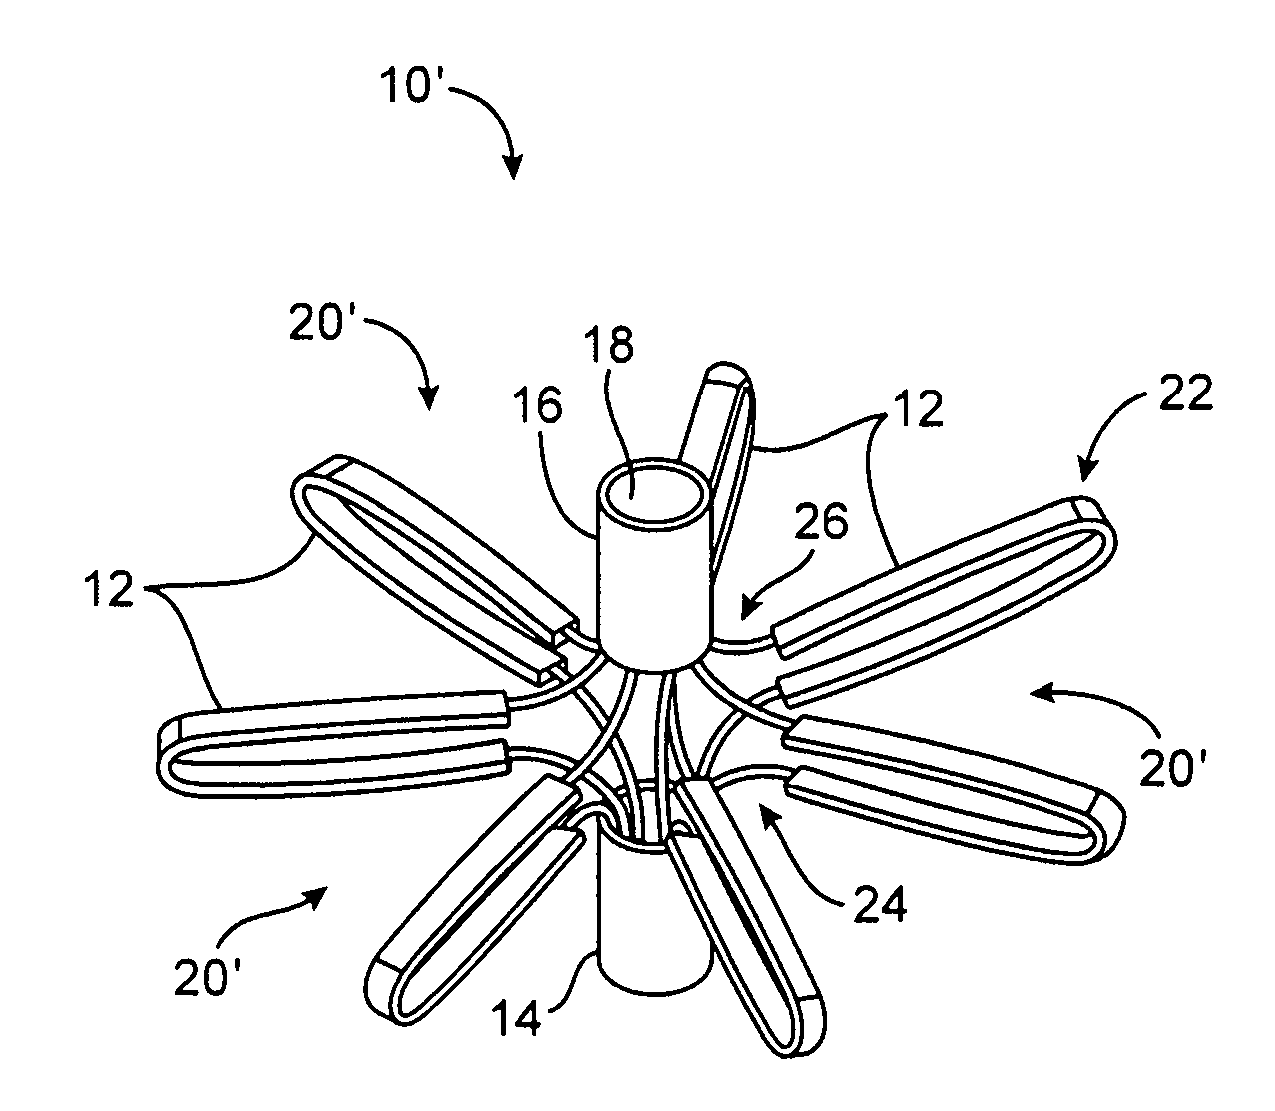 Apparatus and methods for optimizing anchoring force